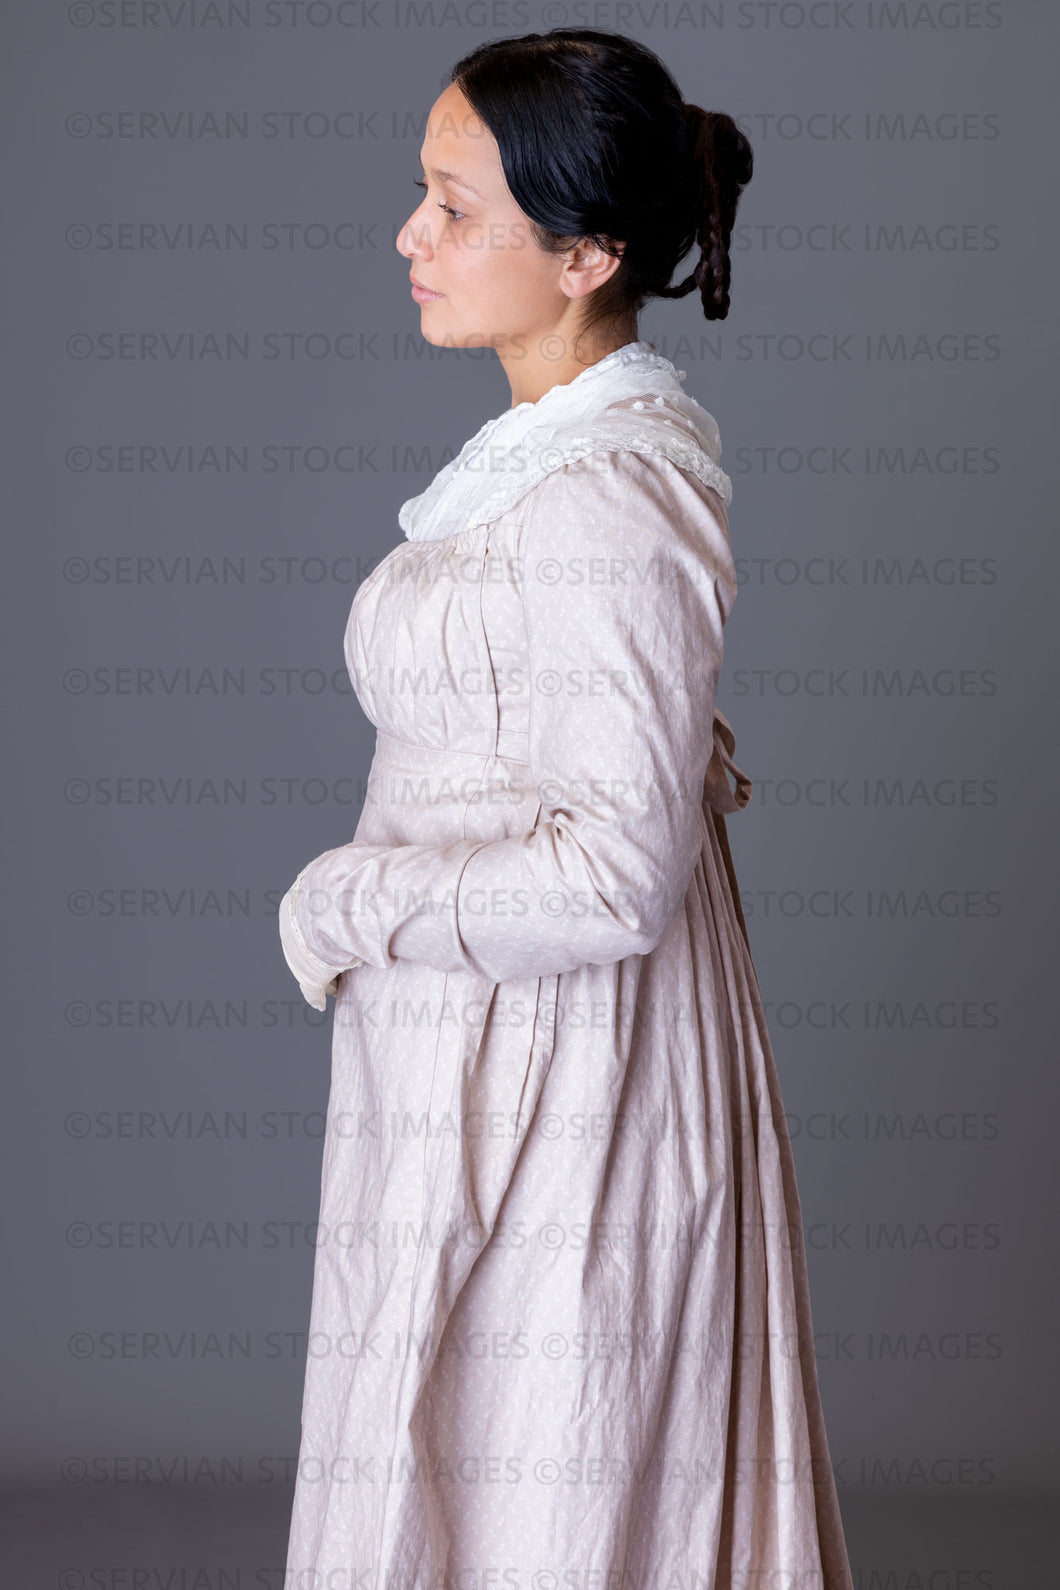 Regency woman wearing a cotton dress with a lace modesty shawl (Sylvia 5940)